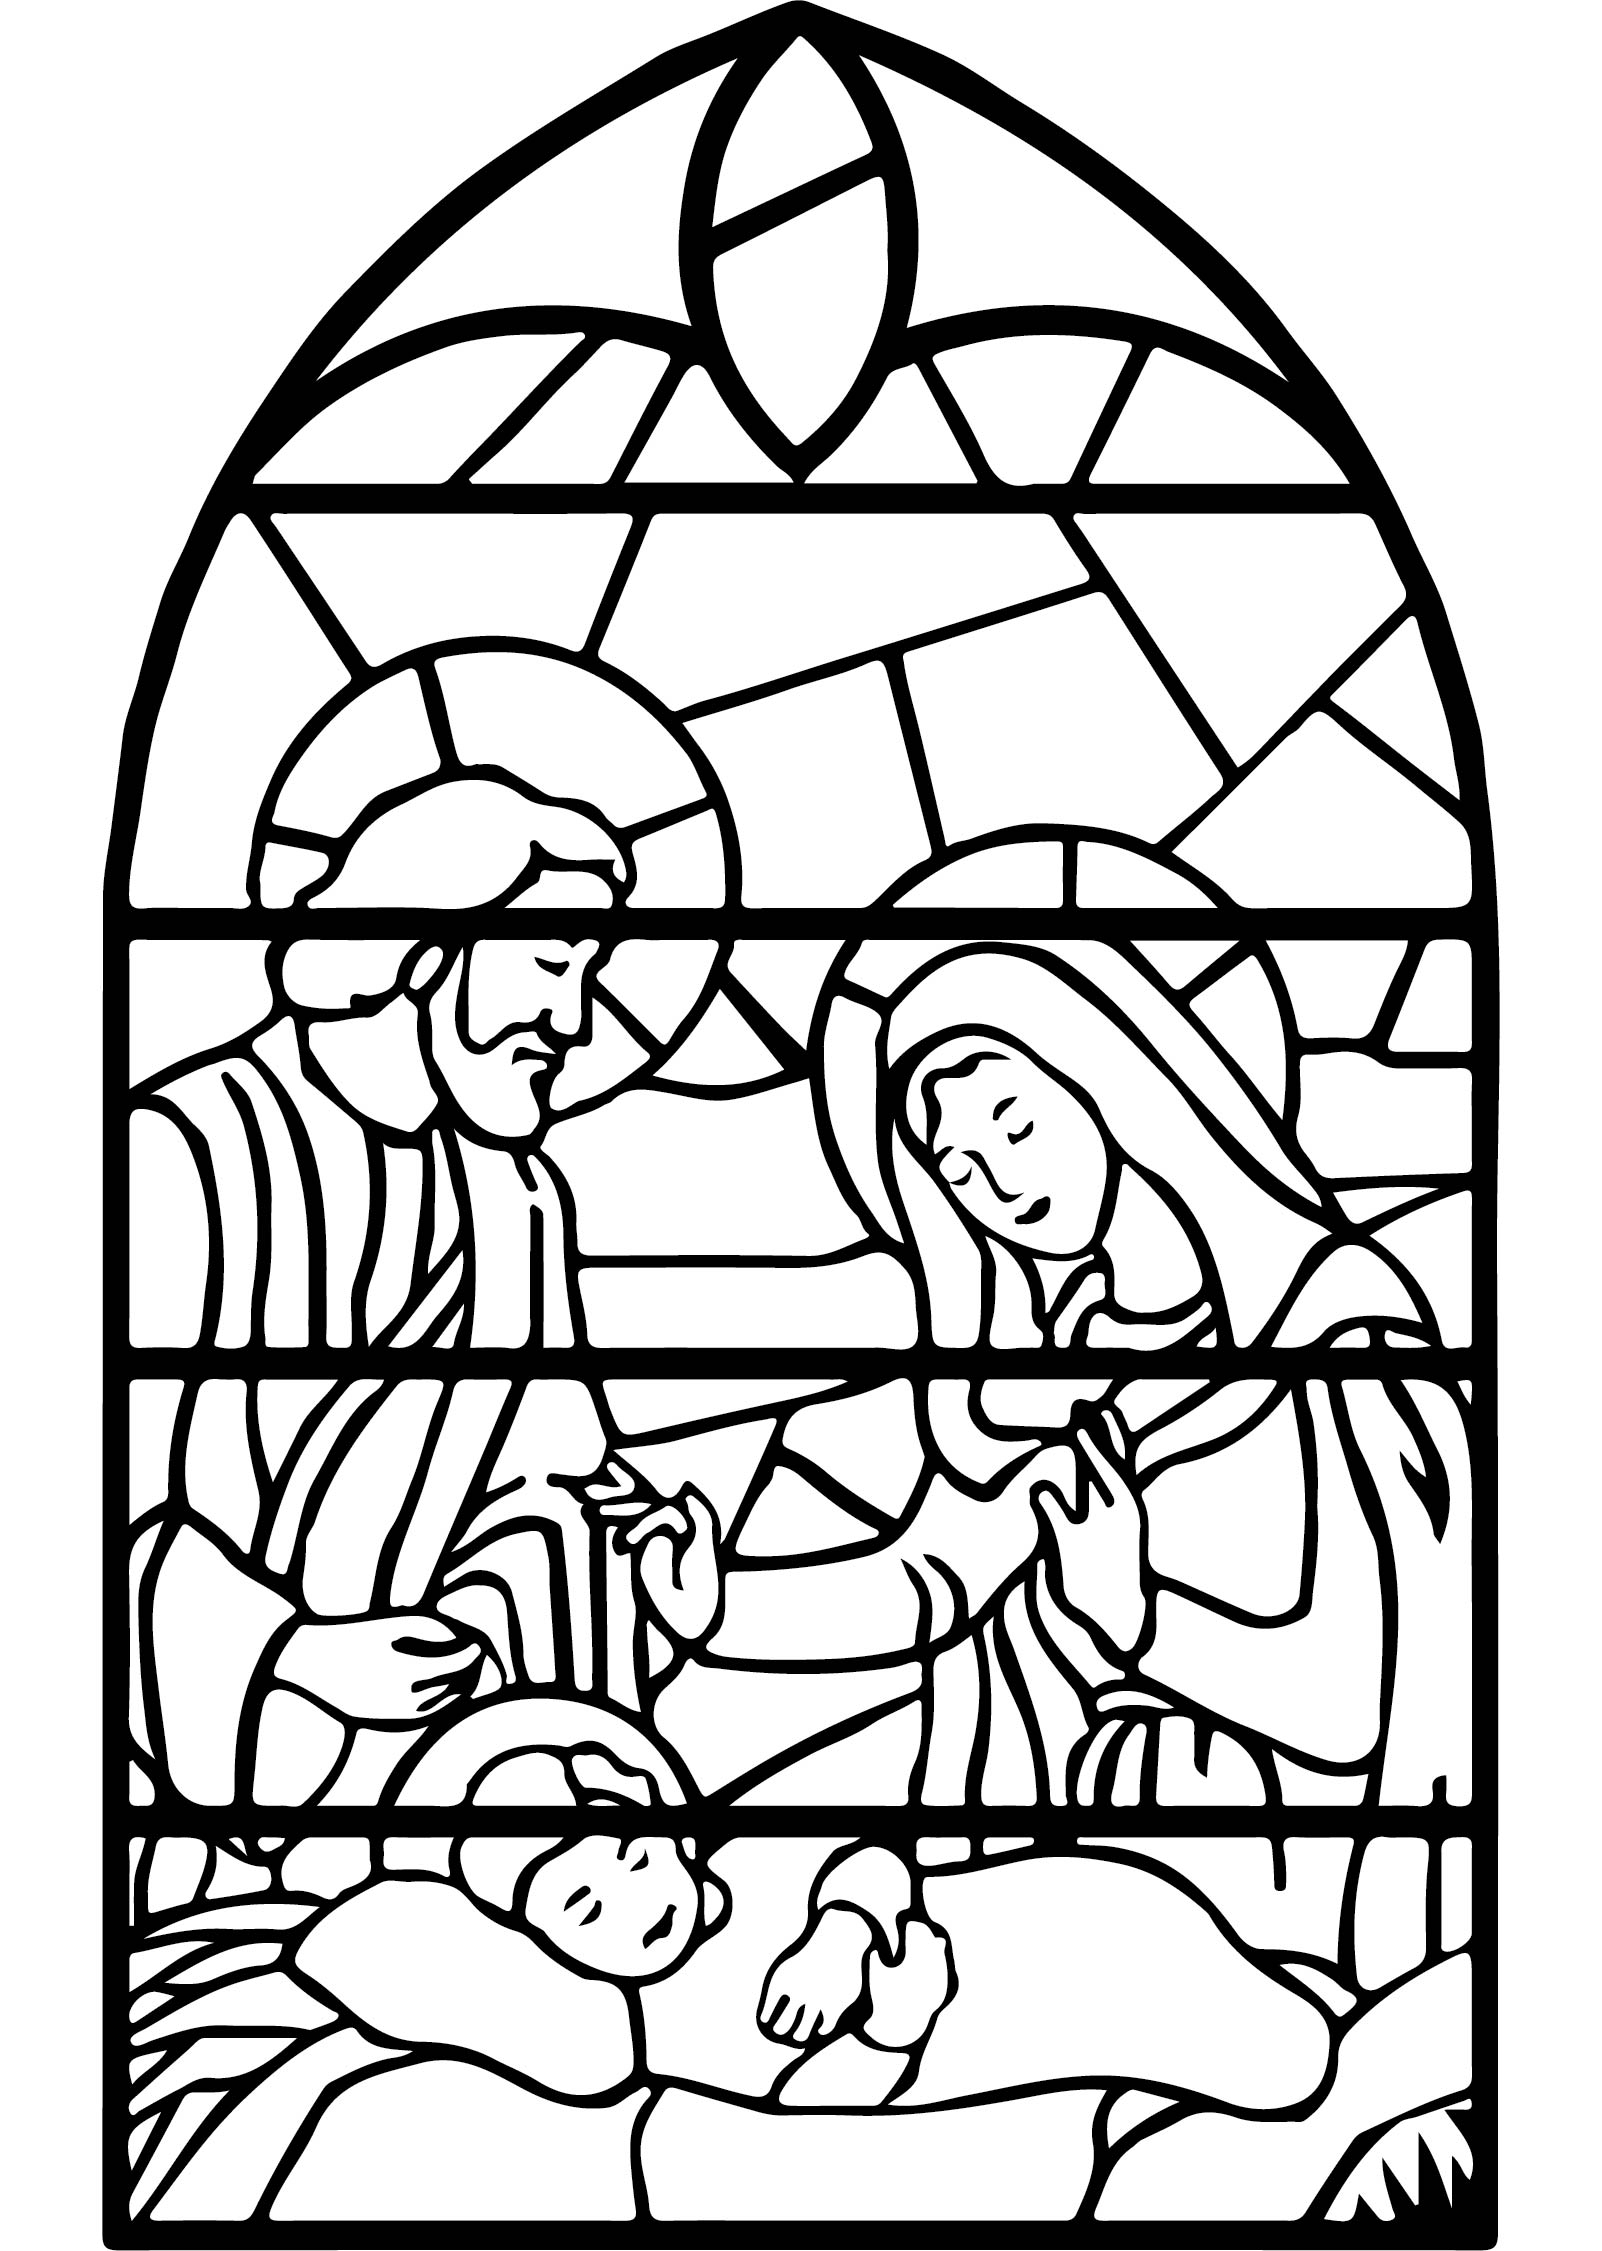 15 Best Christmas Nativity Scene Coloring Page Printable PDF For Free At Printablee